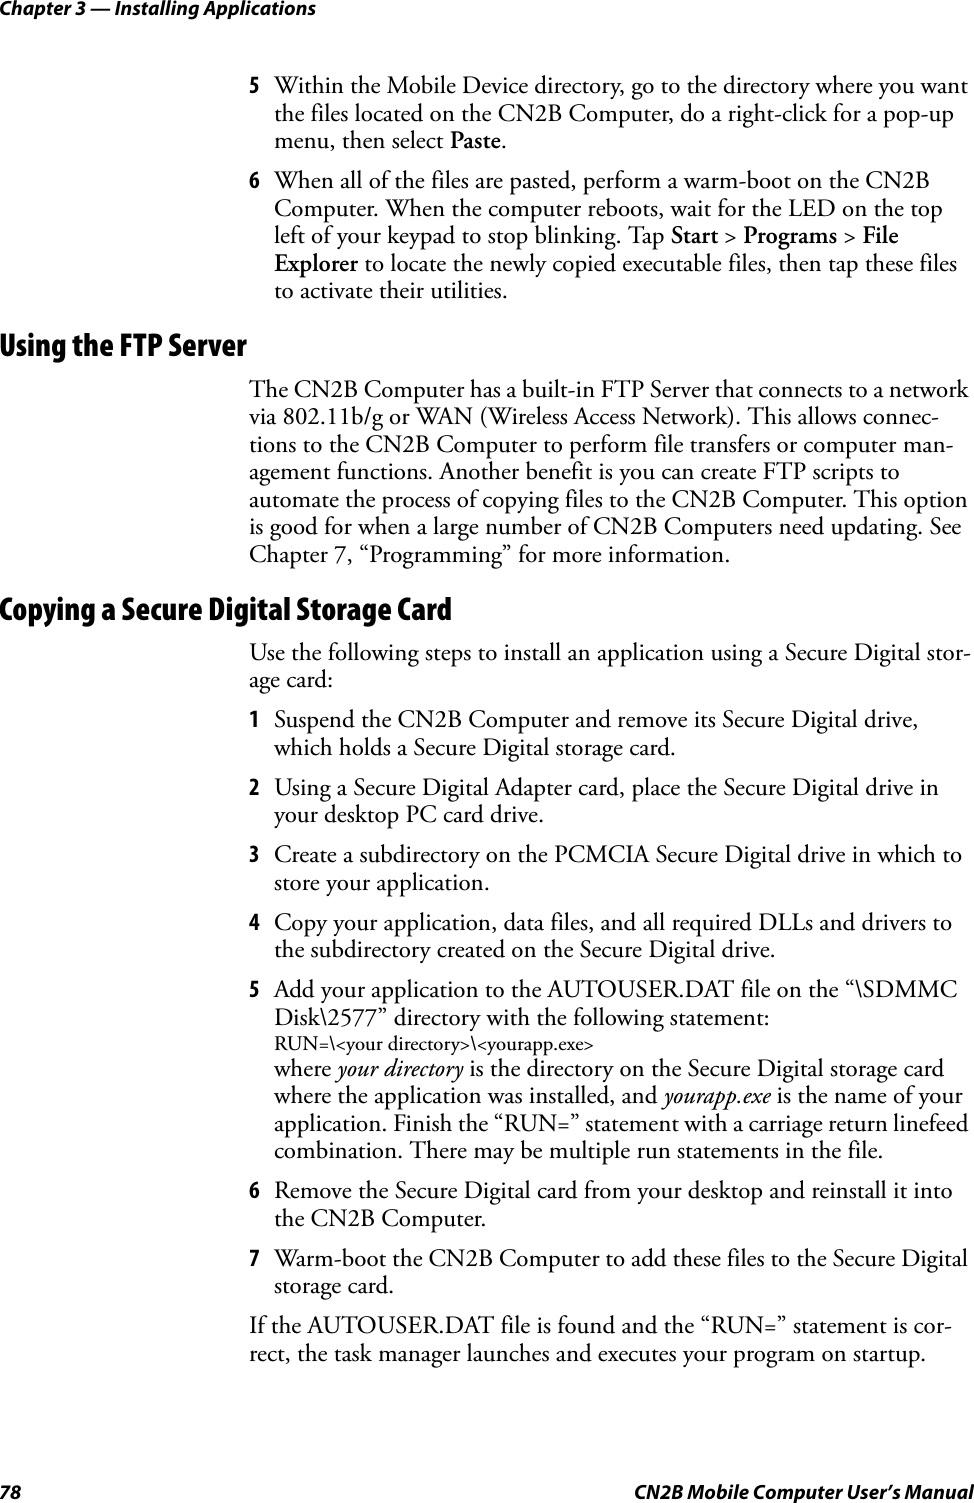 Chapter 3 — Installing Applications78 CN2B Mobile Computer User’s Manual5Within the Mobile Device directory, go to the directory where you want the files located on the CN2B Computer, do a right-click for a pop-up menu, then select Paste.6When all of the files are pasted, perform a warm-boot on the CN2B Computer. When the computer reboots, wait for the LED on the top left of your keypad to stop blinking. Tap Start &gt; Programs &gt; File Explorer to locate the newly copied executable files, then tap these files to activate their utilities.Using the FTP ServerThe CN2B Computer has a built-in FTP Server that connects to a network via 802.11b/g or WAN (Wireless Access Network). This allows connec-tions to the CN2B Computer to perform file transfers or computer man-agement functions. Another benefit is you can create FTP scripts to automate the process of copying files to the CN2B Computer. This option is good for when a large number of CN2B Computers need updating. See Chapter 7, “Programming” for more information.Copying a Secure Digital Storage CardUse the following steps to install an application using a Secure Digital stor-age card:1Suspend the CN2B Computer and remove its Secure Digital drive, which holds a Secure Digital storage card.2Using a Secure Digital Adapter card, place the Secure Digital drive in your desktop PC card drive.3Create a subdirectory on the PCMCIA Secure Digital drive in which to store your application.4Copy your application, data files, and all required DLLs and drivers to the subdirectory created on the Secure Digital drive.5Add your application to the AUTOUSER.DAT file on the “\SDMMC Disk\2577” directory with the following statement: RUN=\&lt;your directory&gt;\&lt;yourapp.exe&gt;where your directory is the directory on the Secure Digital storage card where the application was installed, and yourapp.exe is the name of your application. Finish the “RUN=” statement with a carriage return linefeed combination. There may be multiple run statements in the file.6Remove the Secure Digital card from your desktop and reinstall it into the CN2B Computer.7Warm-boot the CN2B Computer to add these files to the Secure Digital storage card.If the AUTOUSER.DAT file is found and the “RUN=” statement is cor-rect, the task manager launches and executes your program on startup.